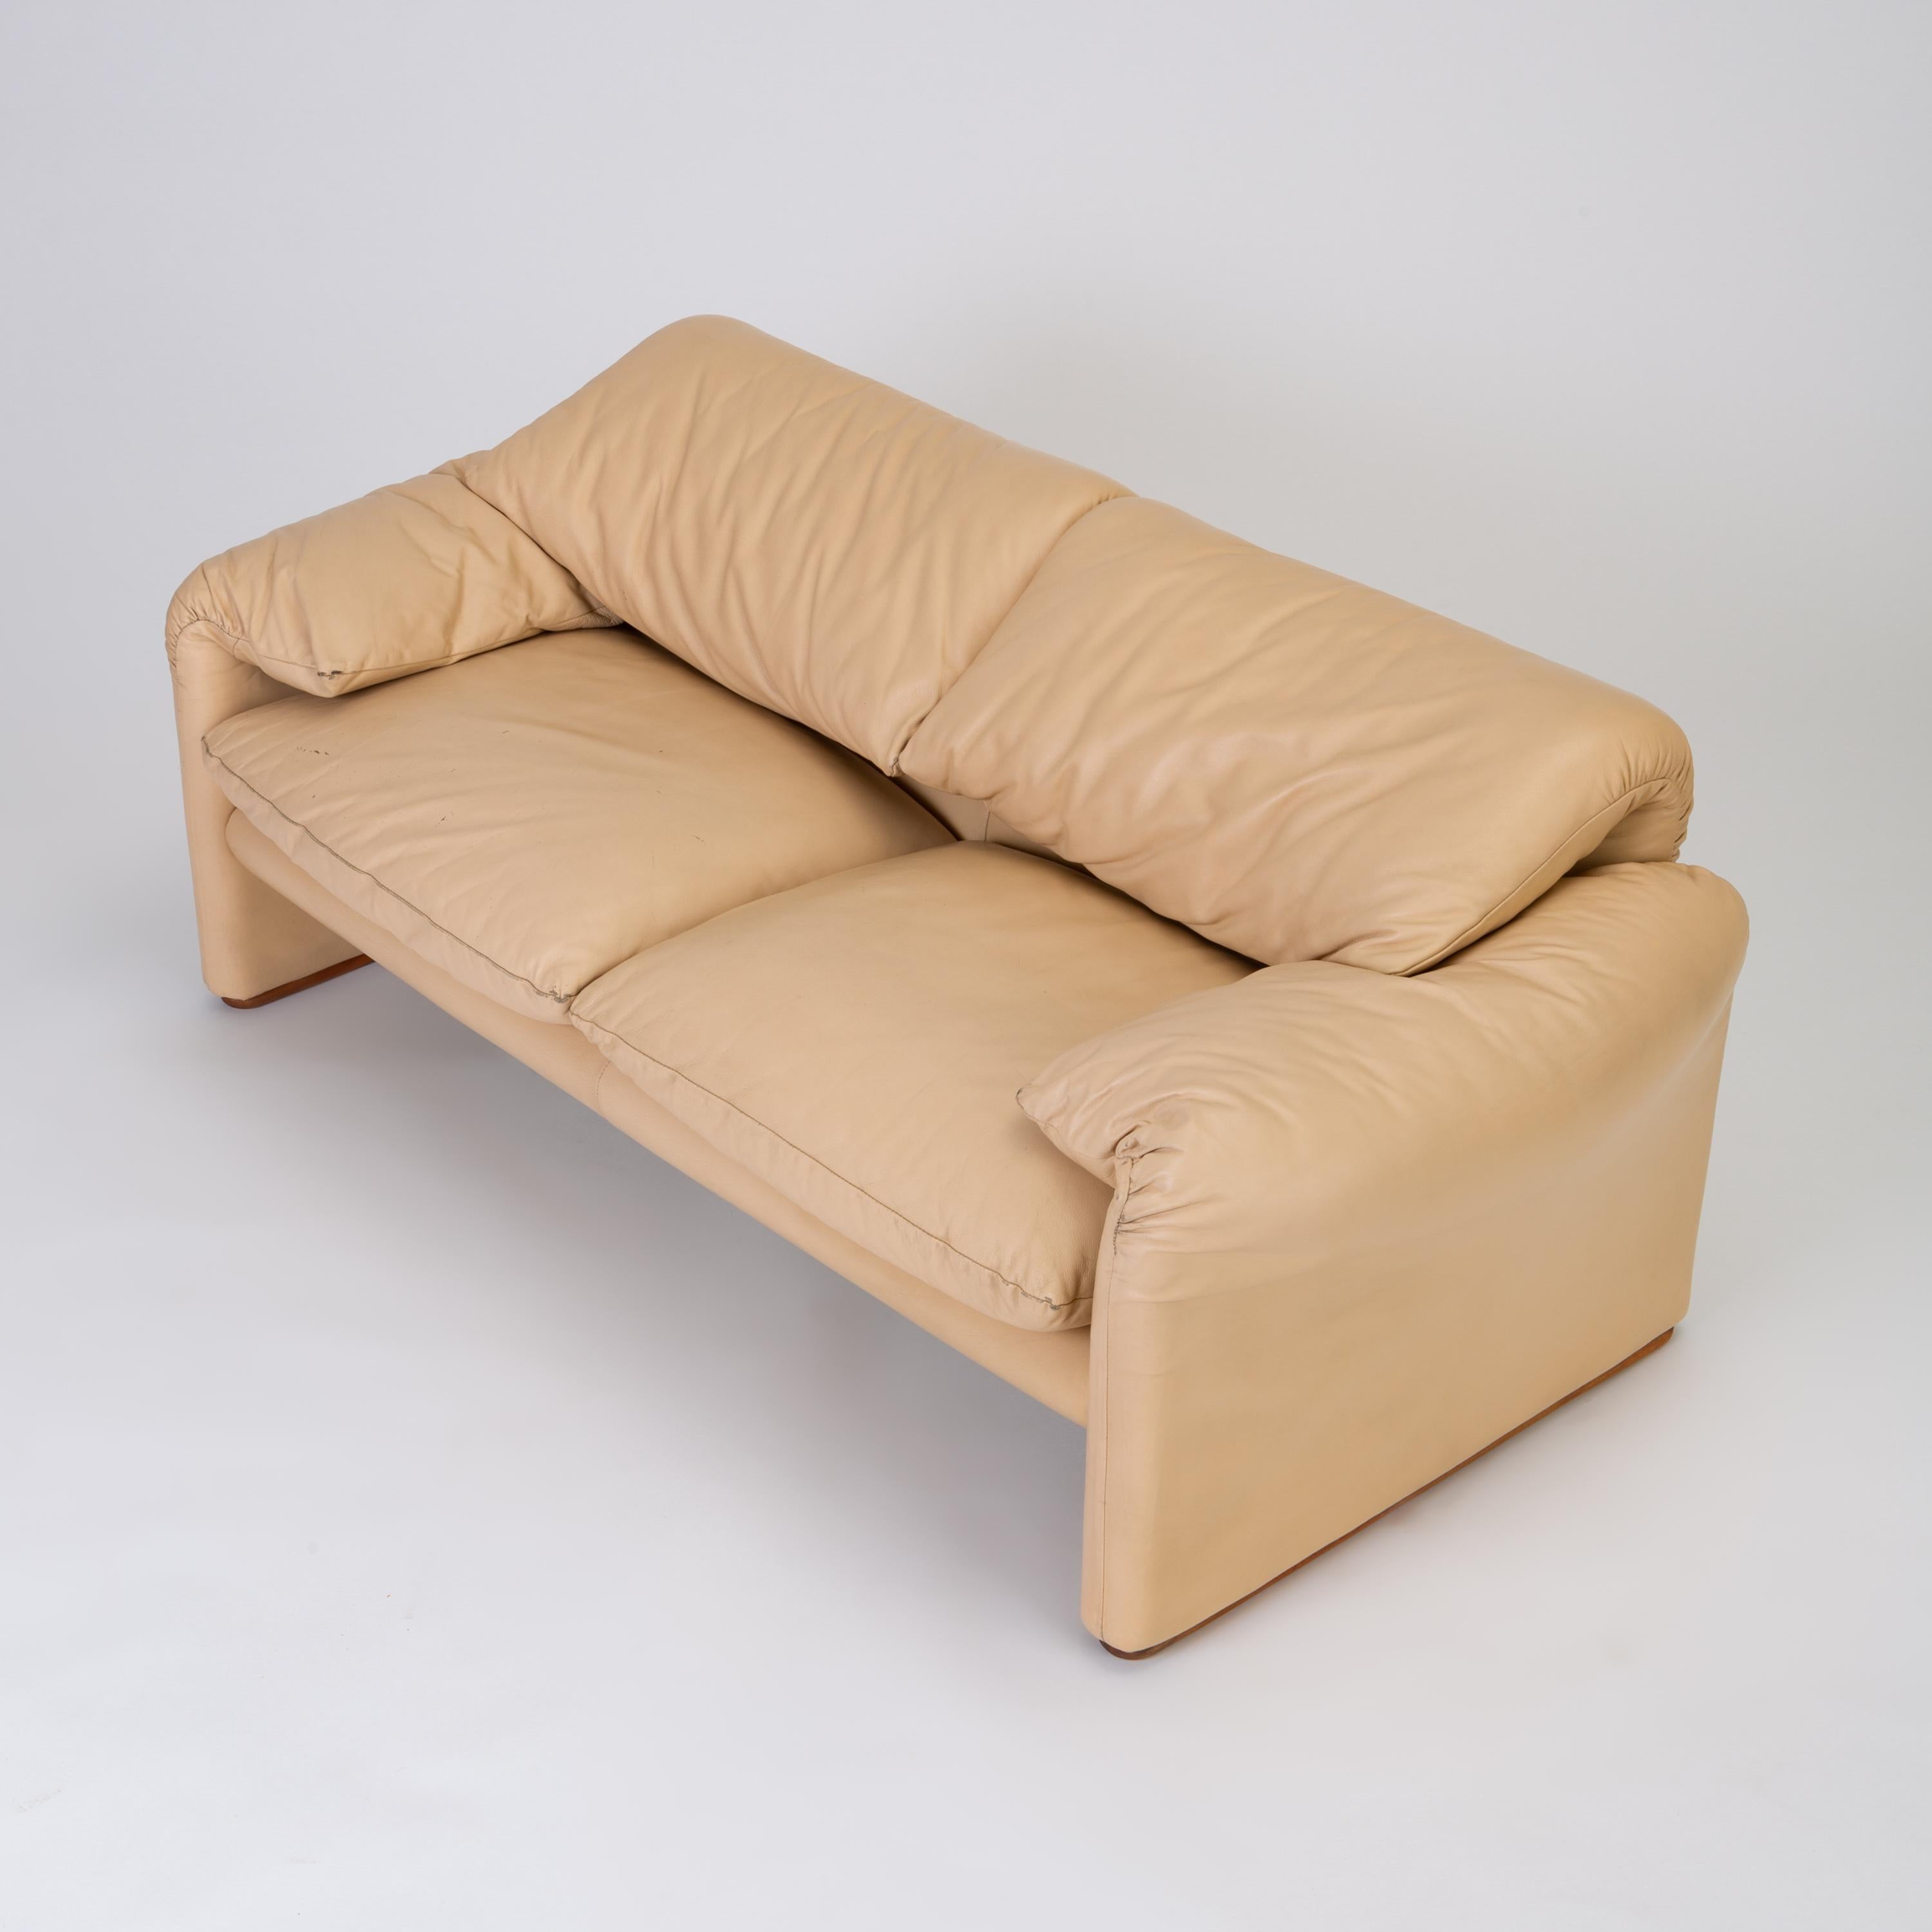 Mid-Century Modern Leather “Maralunga” Loveseat by Vico Magistretti for Cassina